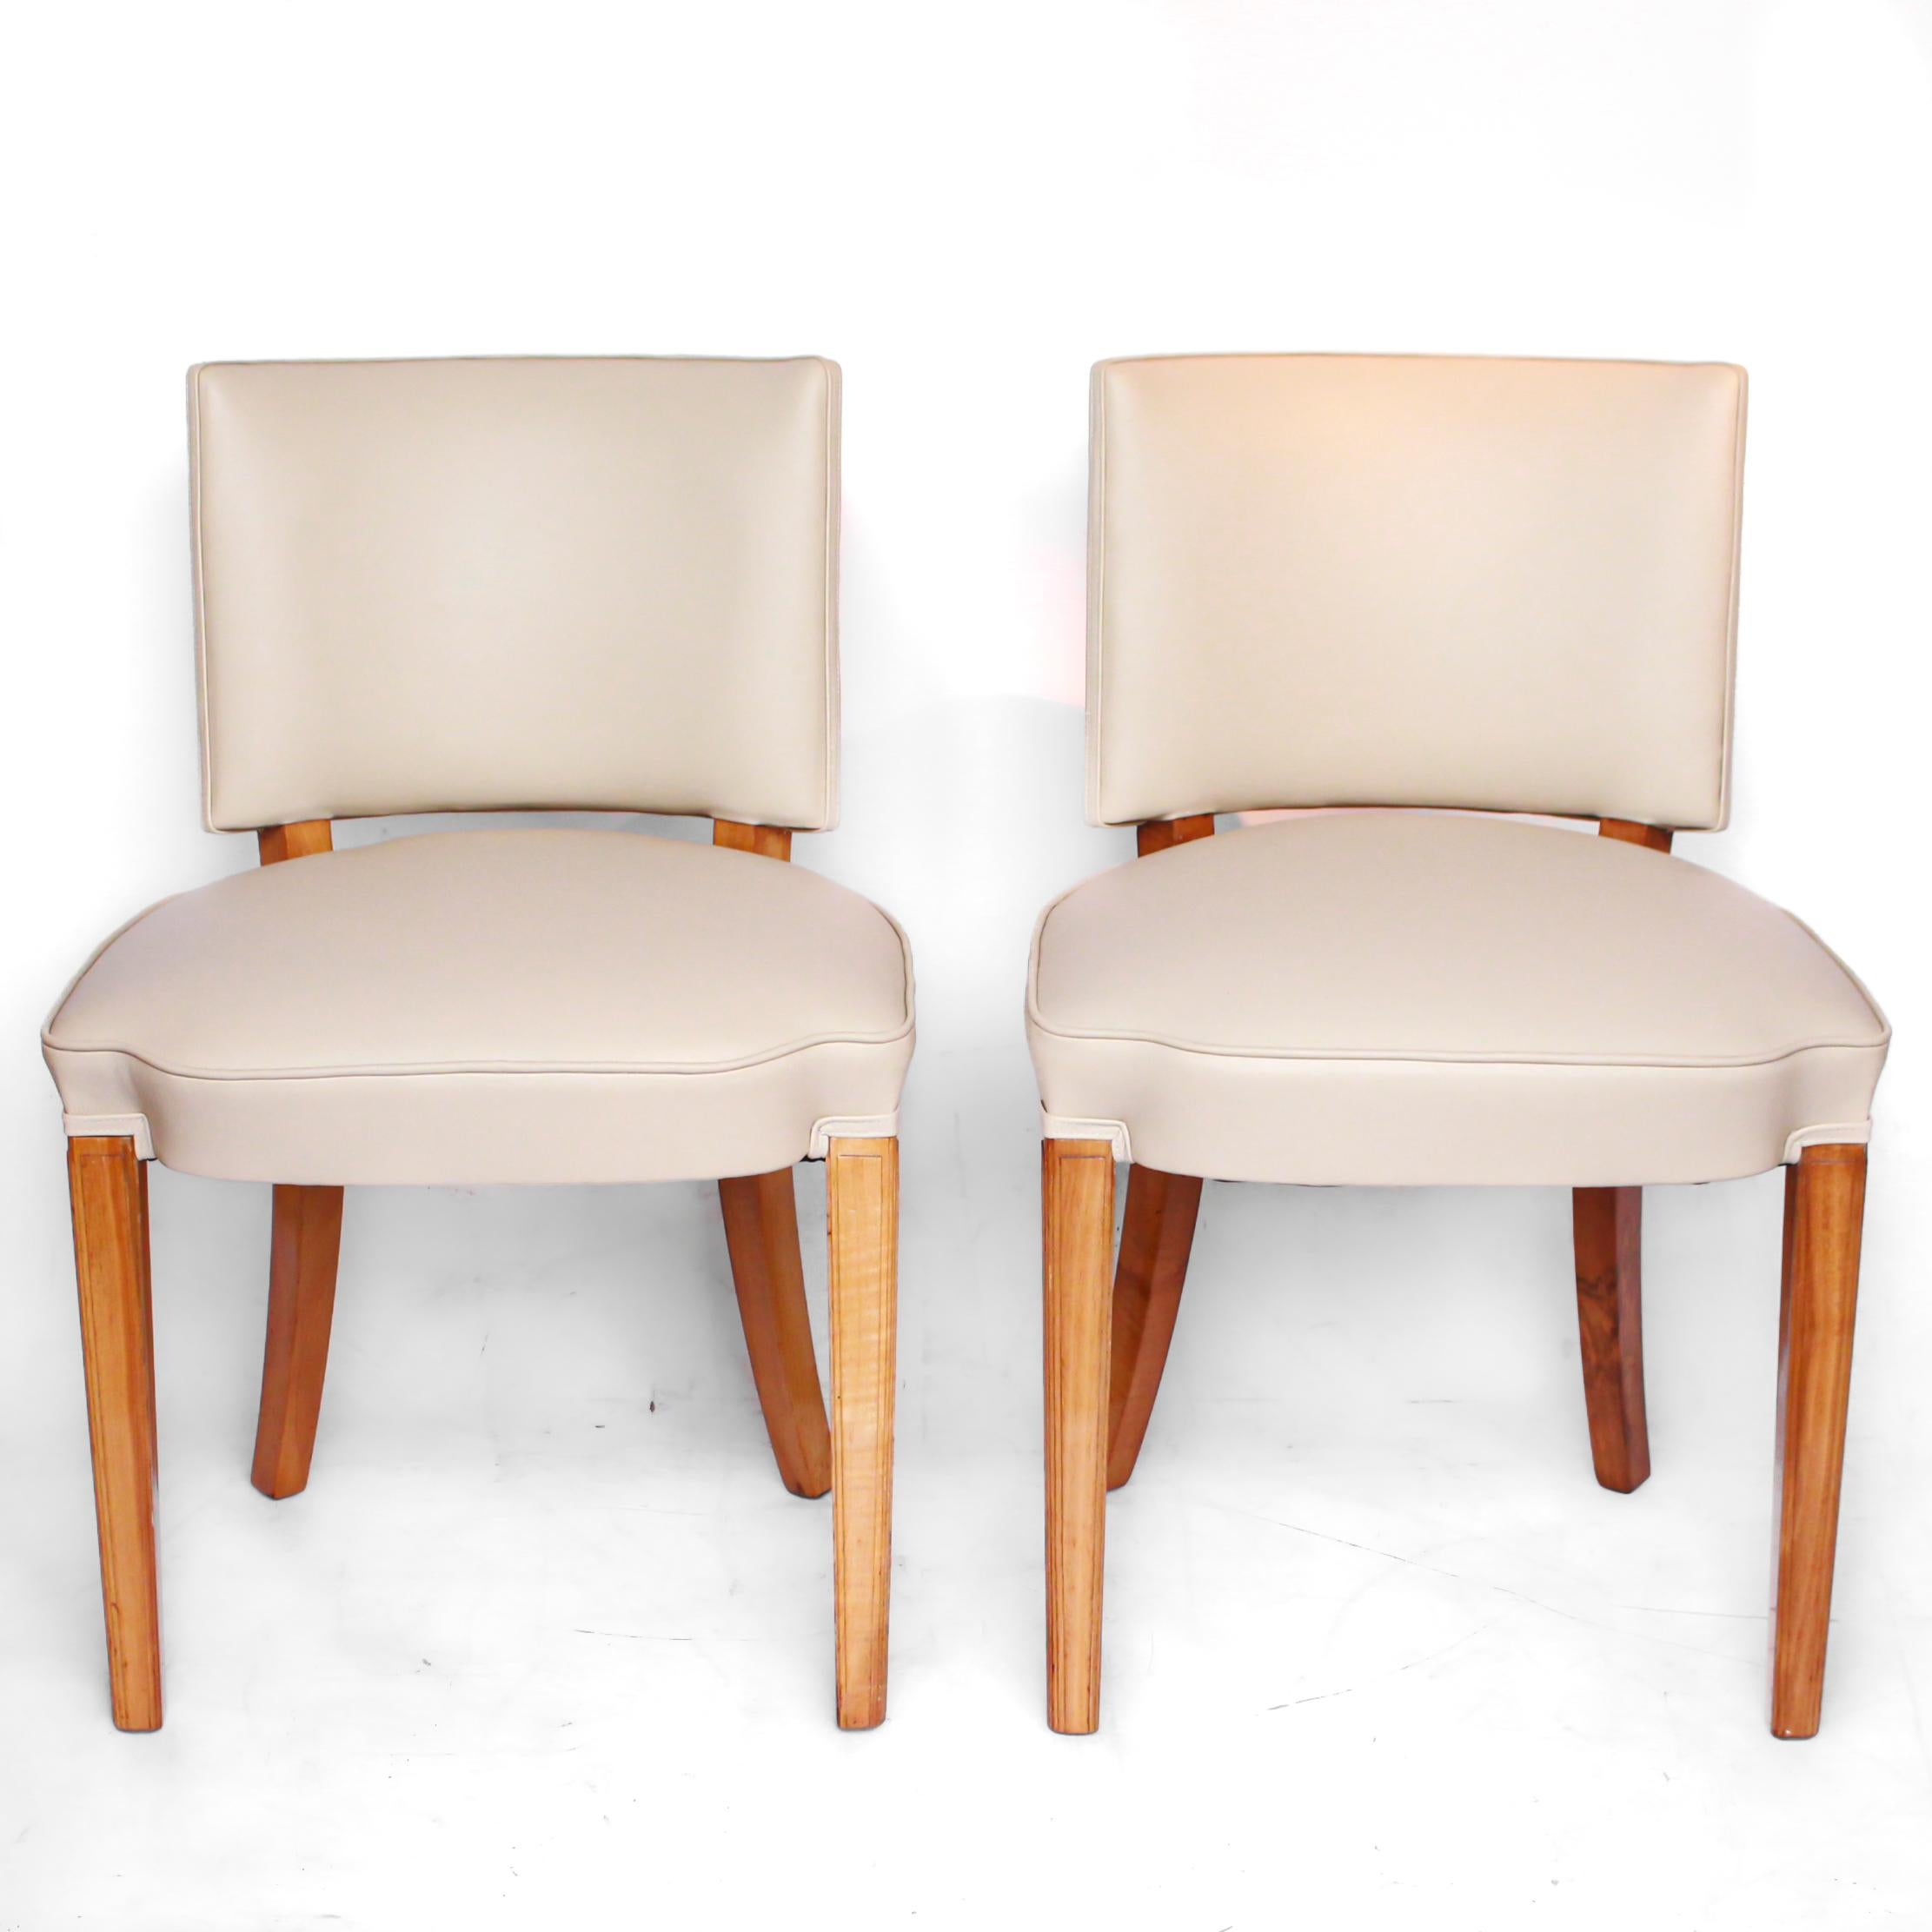 A pair of Art Deco side chairs. Solid and veneered walnut. Upholstered in cream leather. 

Dimensions: H 78 cm, W 51 cm, seat D 45 cm

Origin: English

Date: circa 1935

Item no: 1712195.